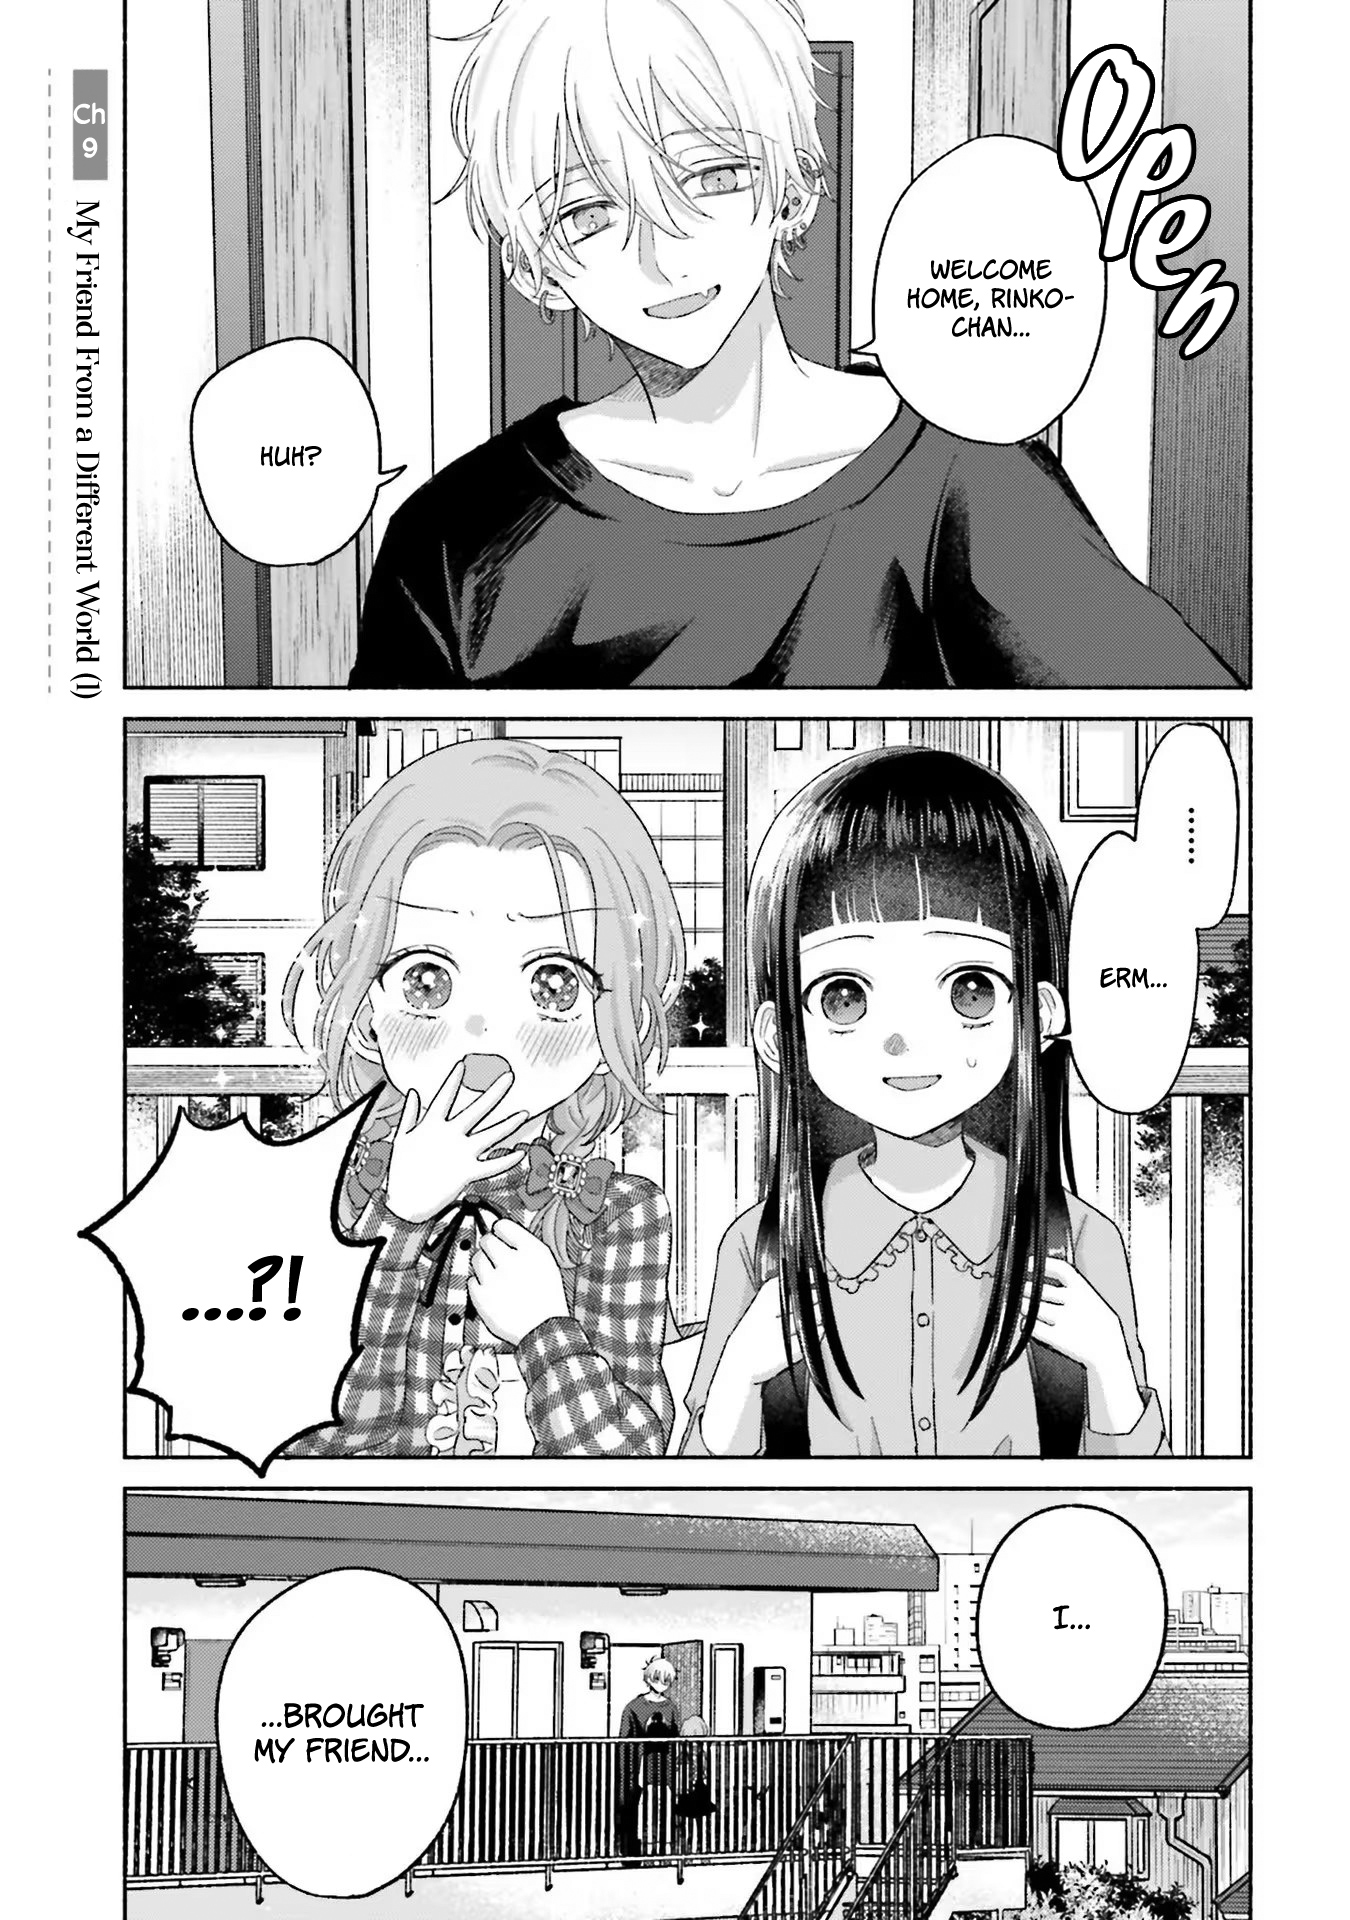 Rinko-Chan To Himosugara Vol.2 Chapter 9: My Friend From A Different World (1) - Picture 1